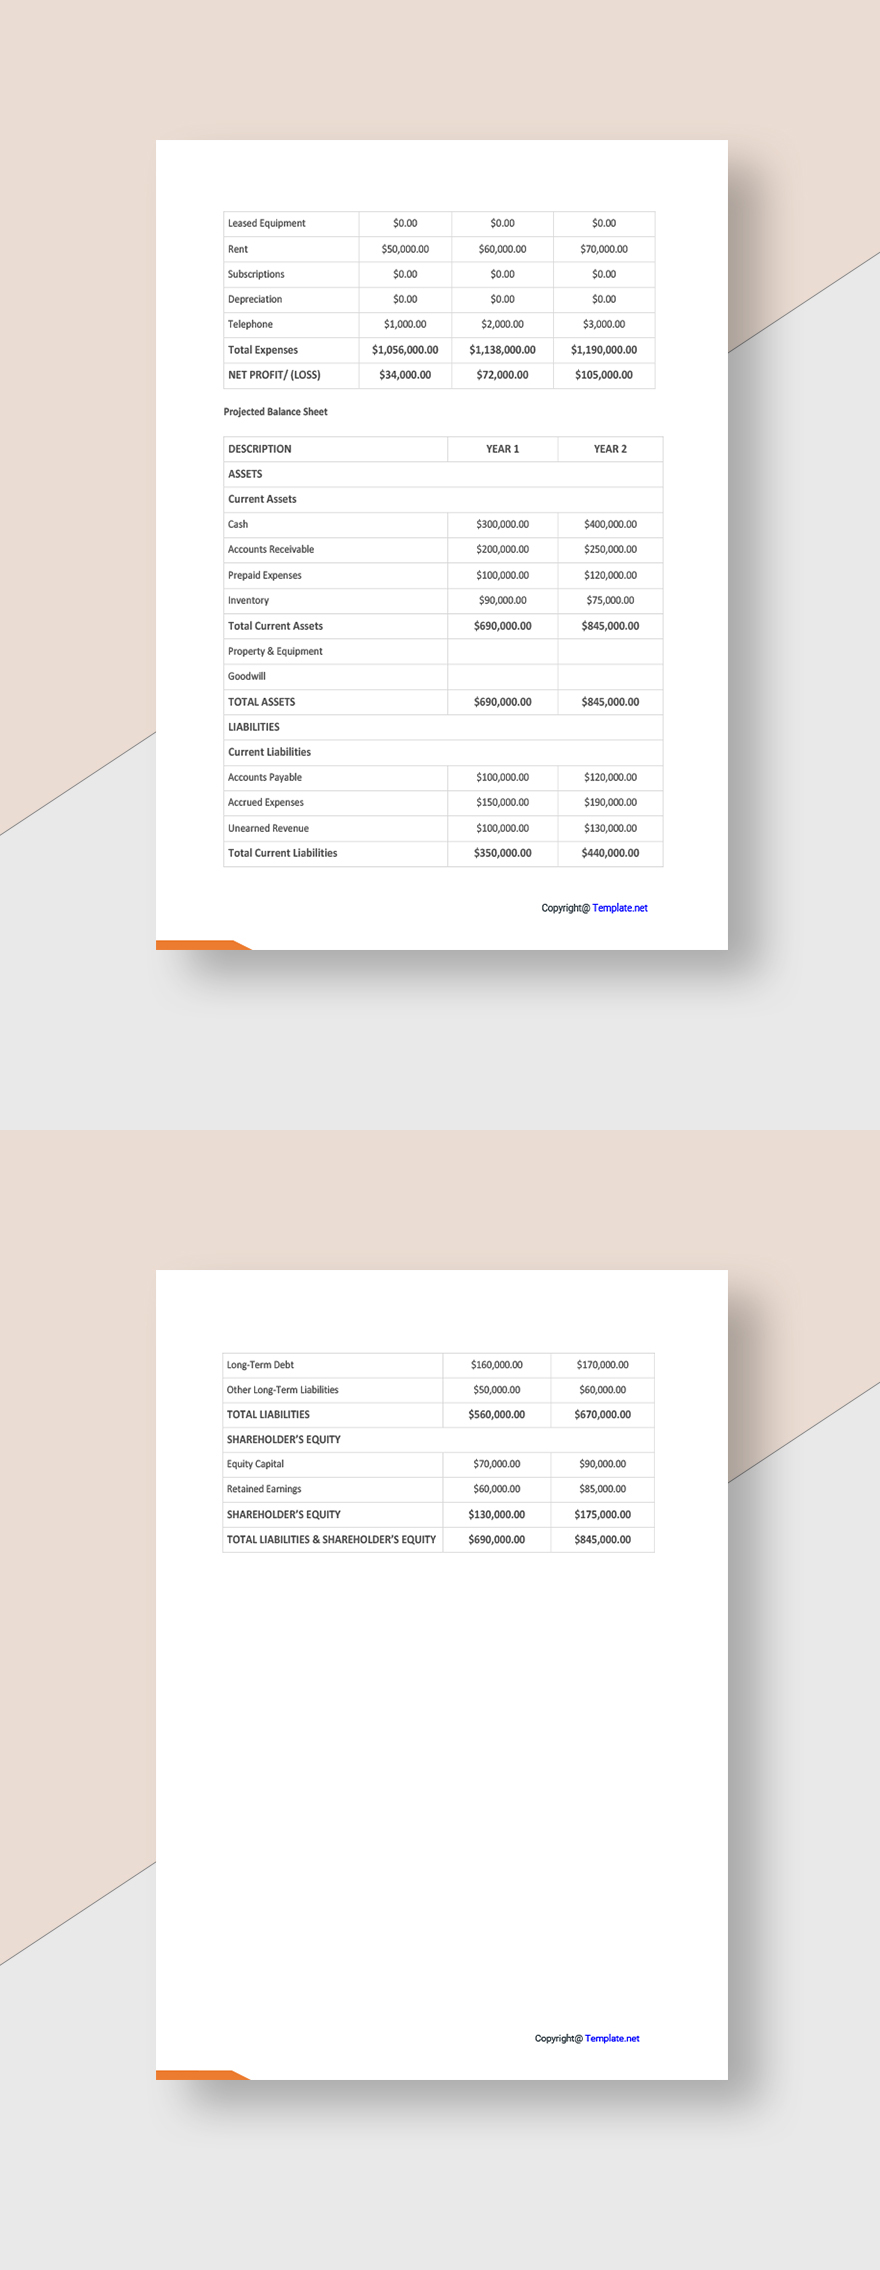 Creative Agency Business Plan Template